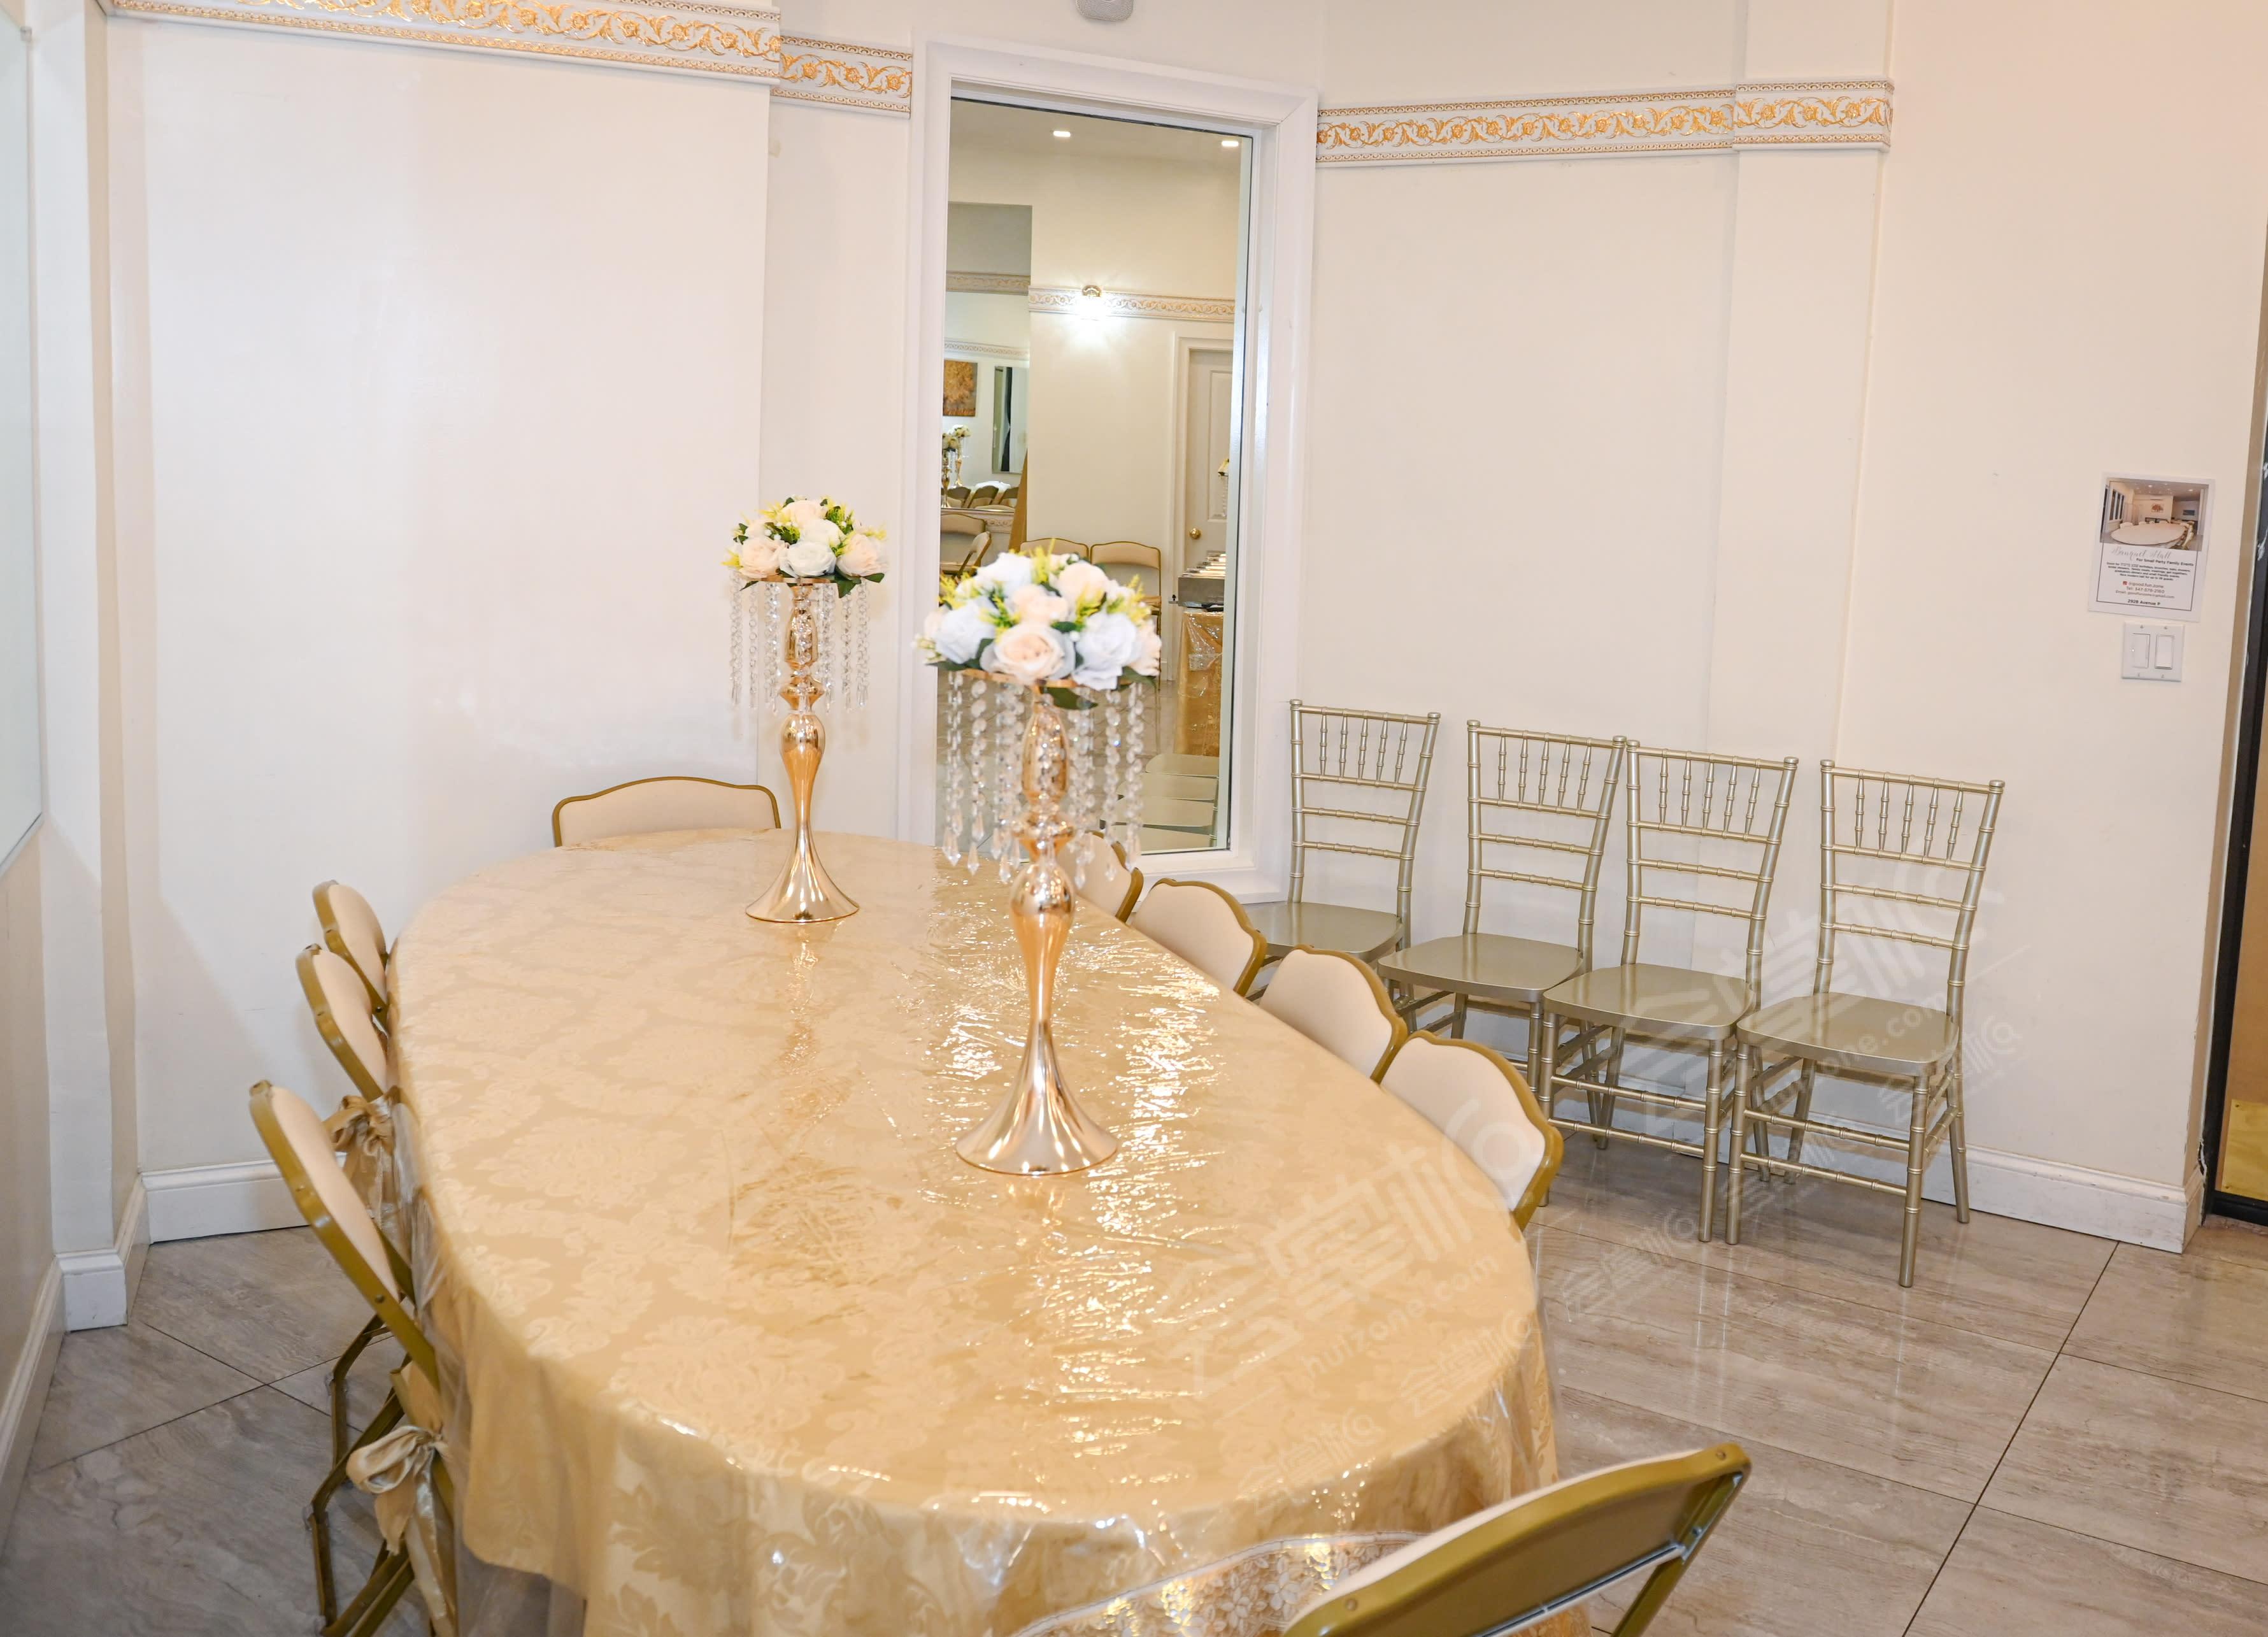 Modern Hall Only for Birthdays & Family Dinners - Bride & Groom Engagements - Business Meetings - Pop Up Shop Store